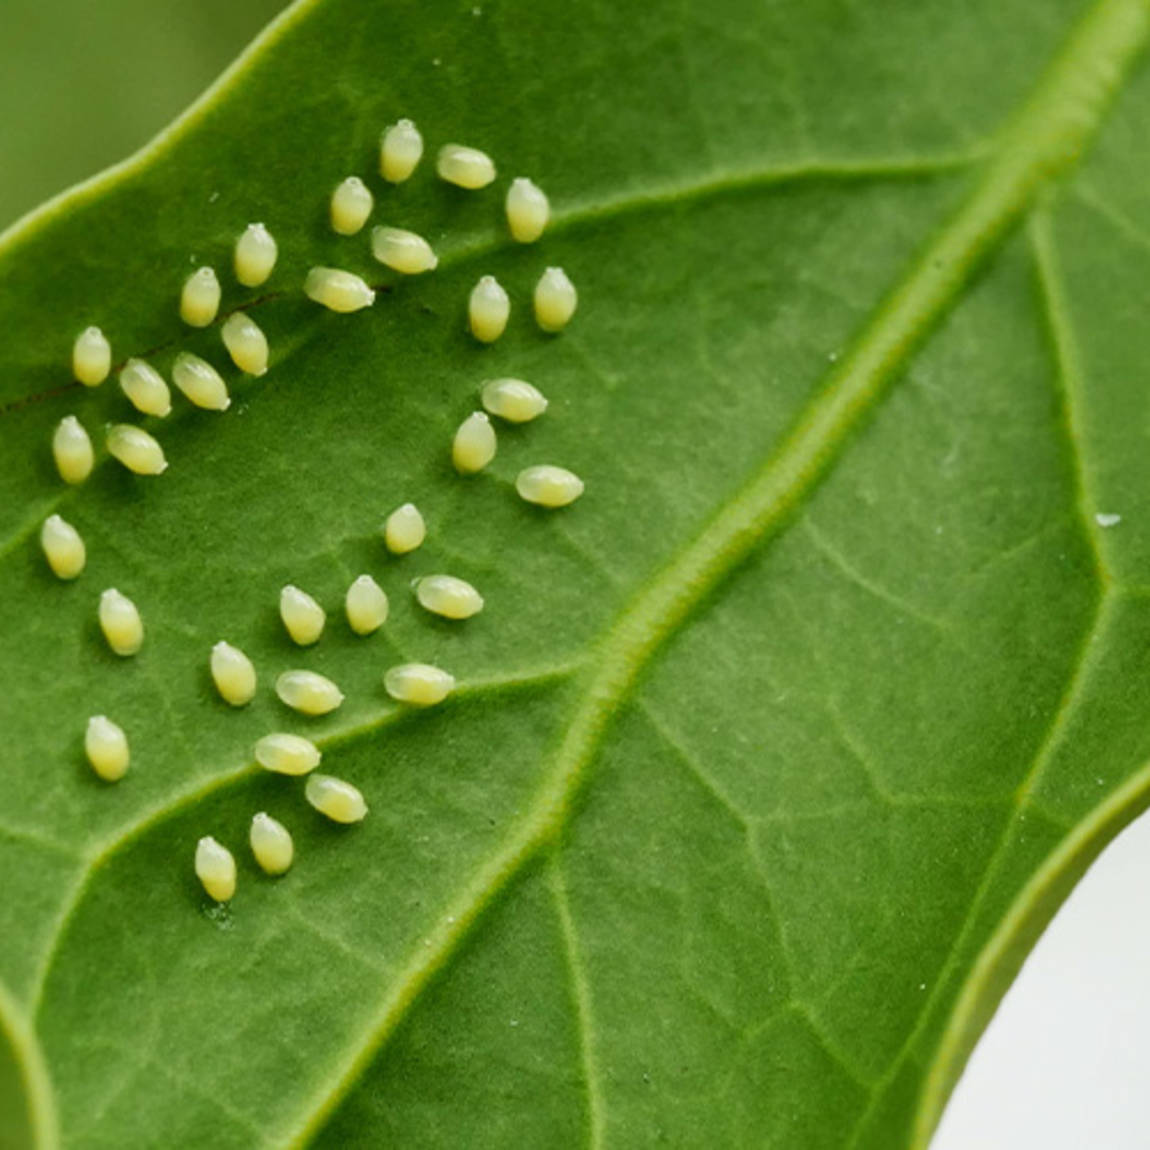 How to get rid of aphids in the garden